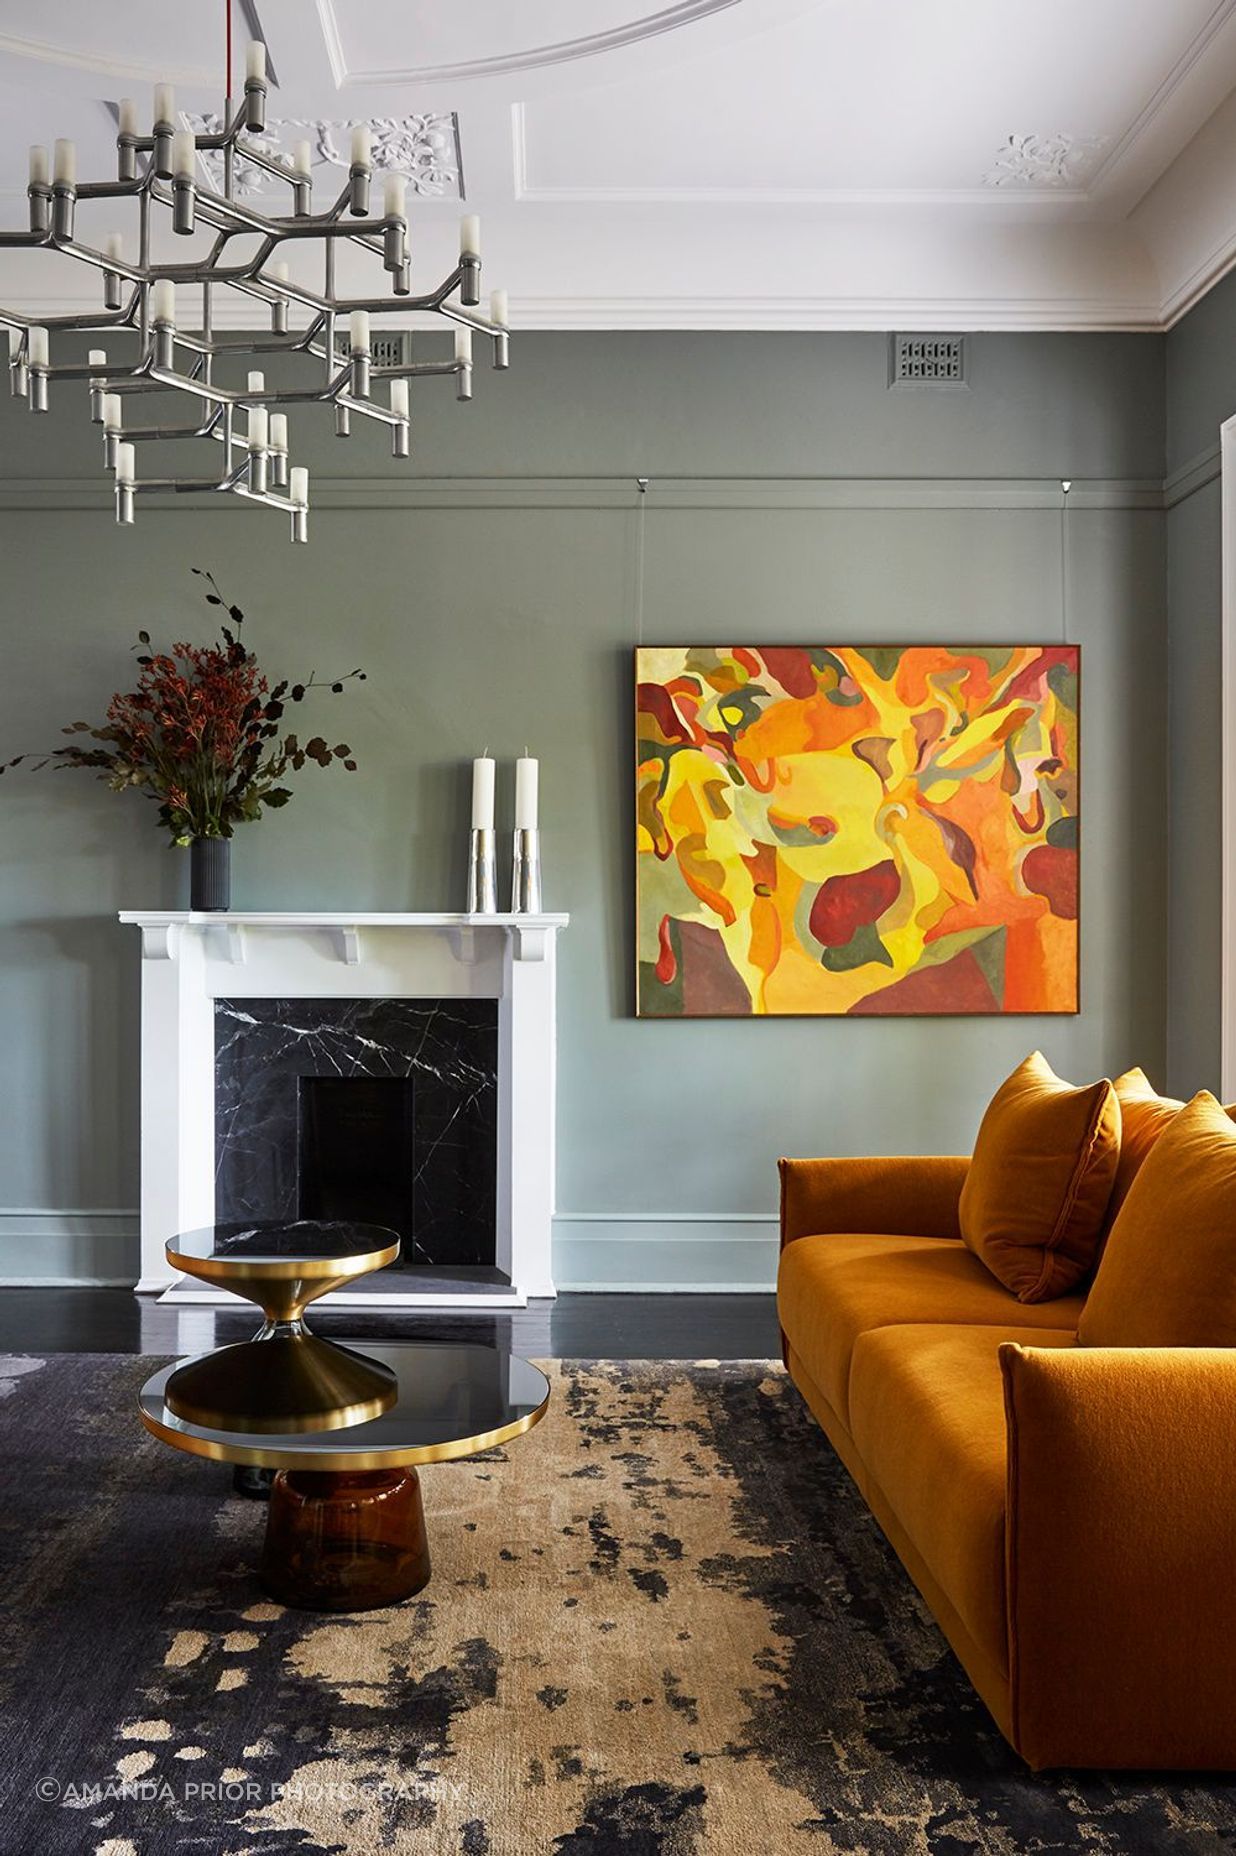 Artwork and feature lighting were key pillars of the interior design